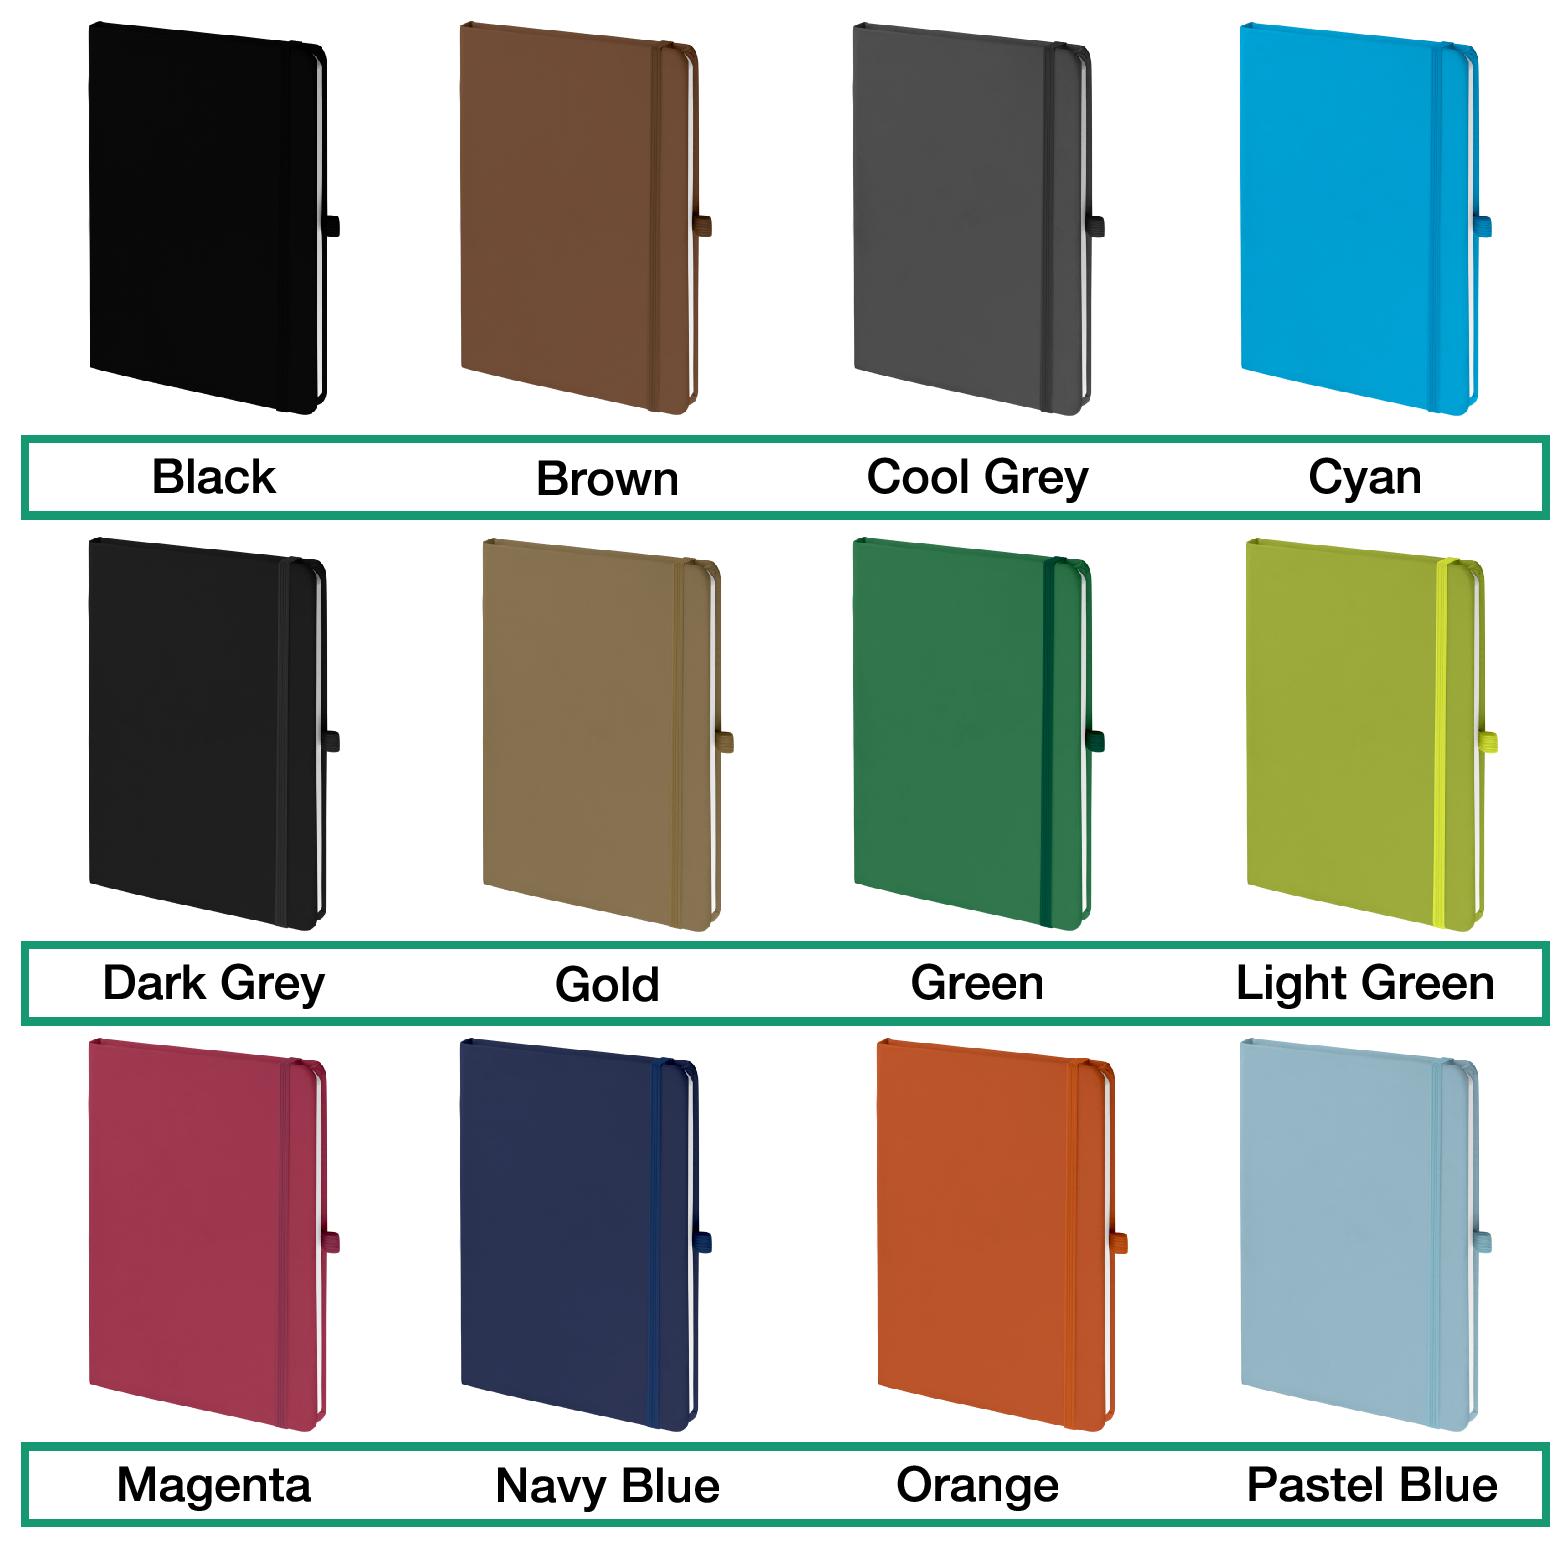 Branded Notebook Colours